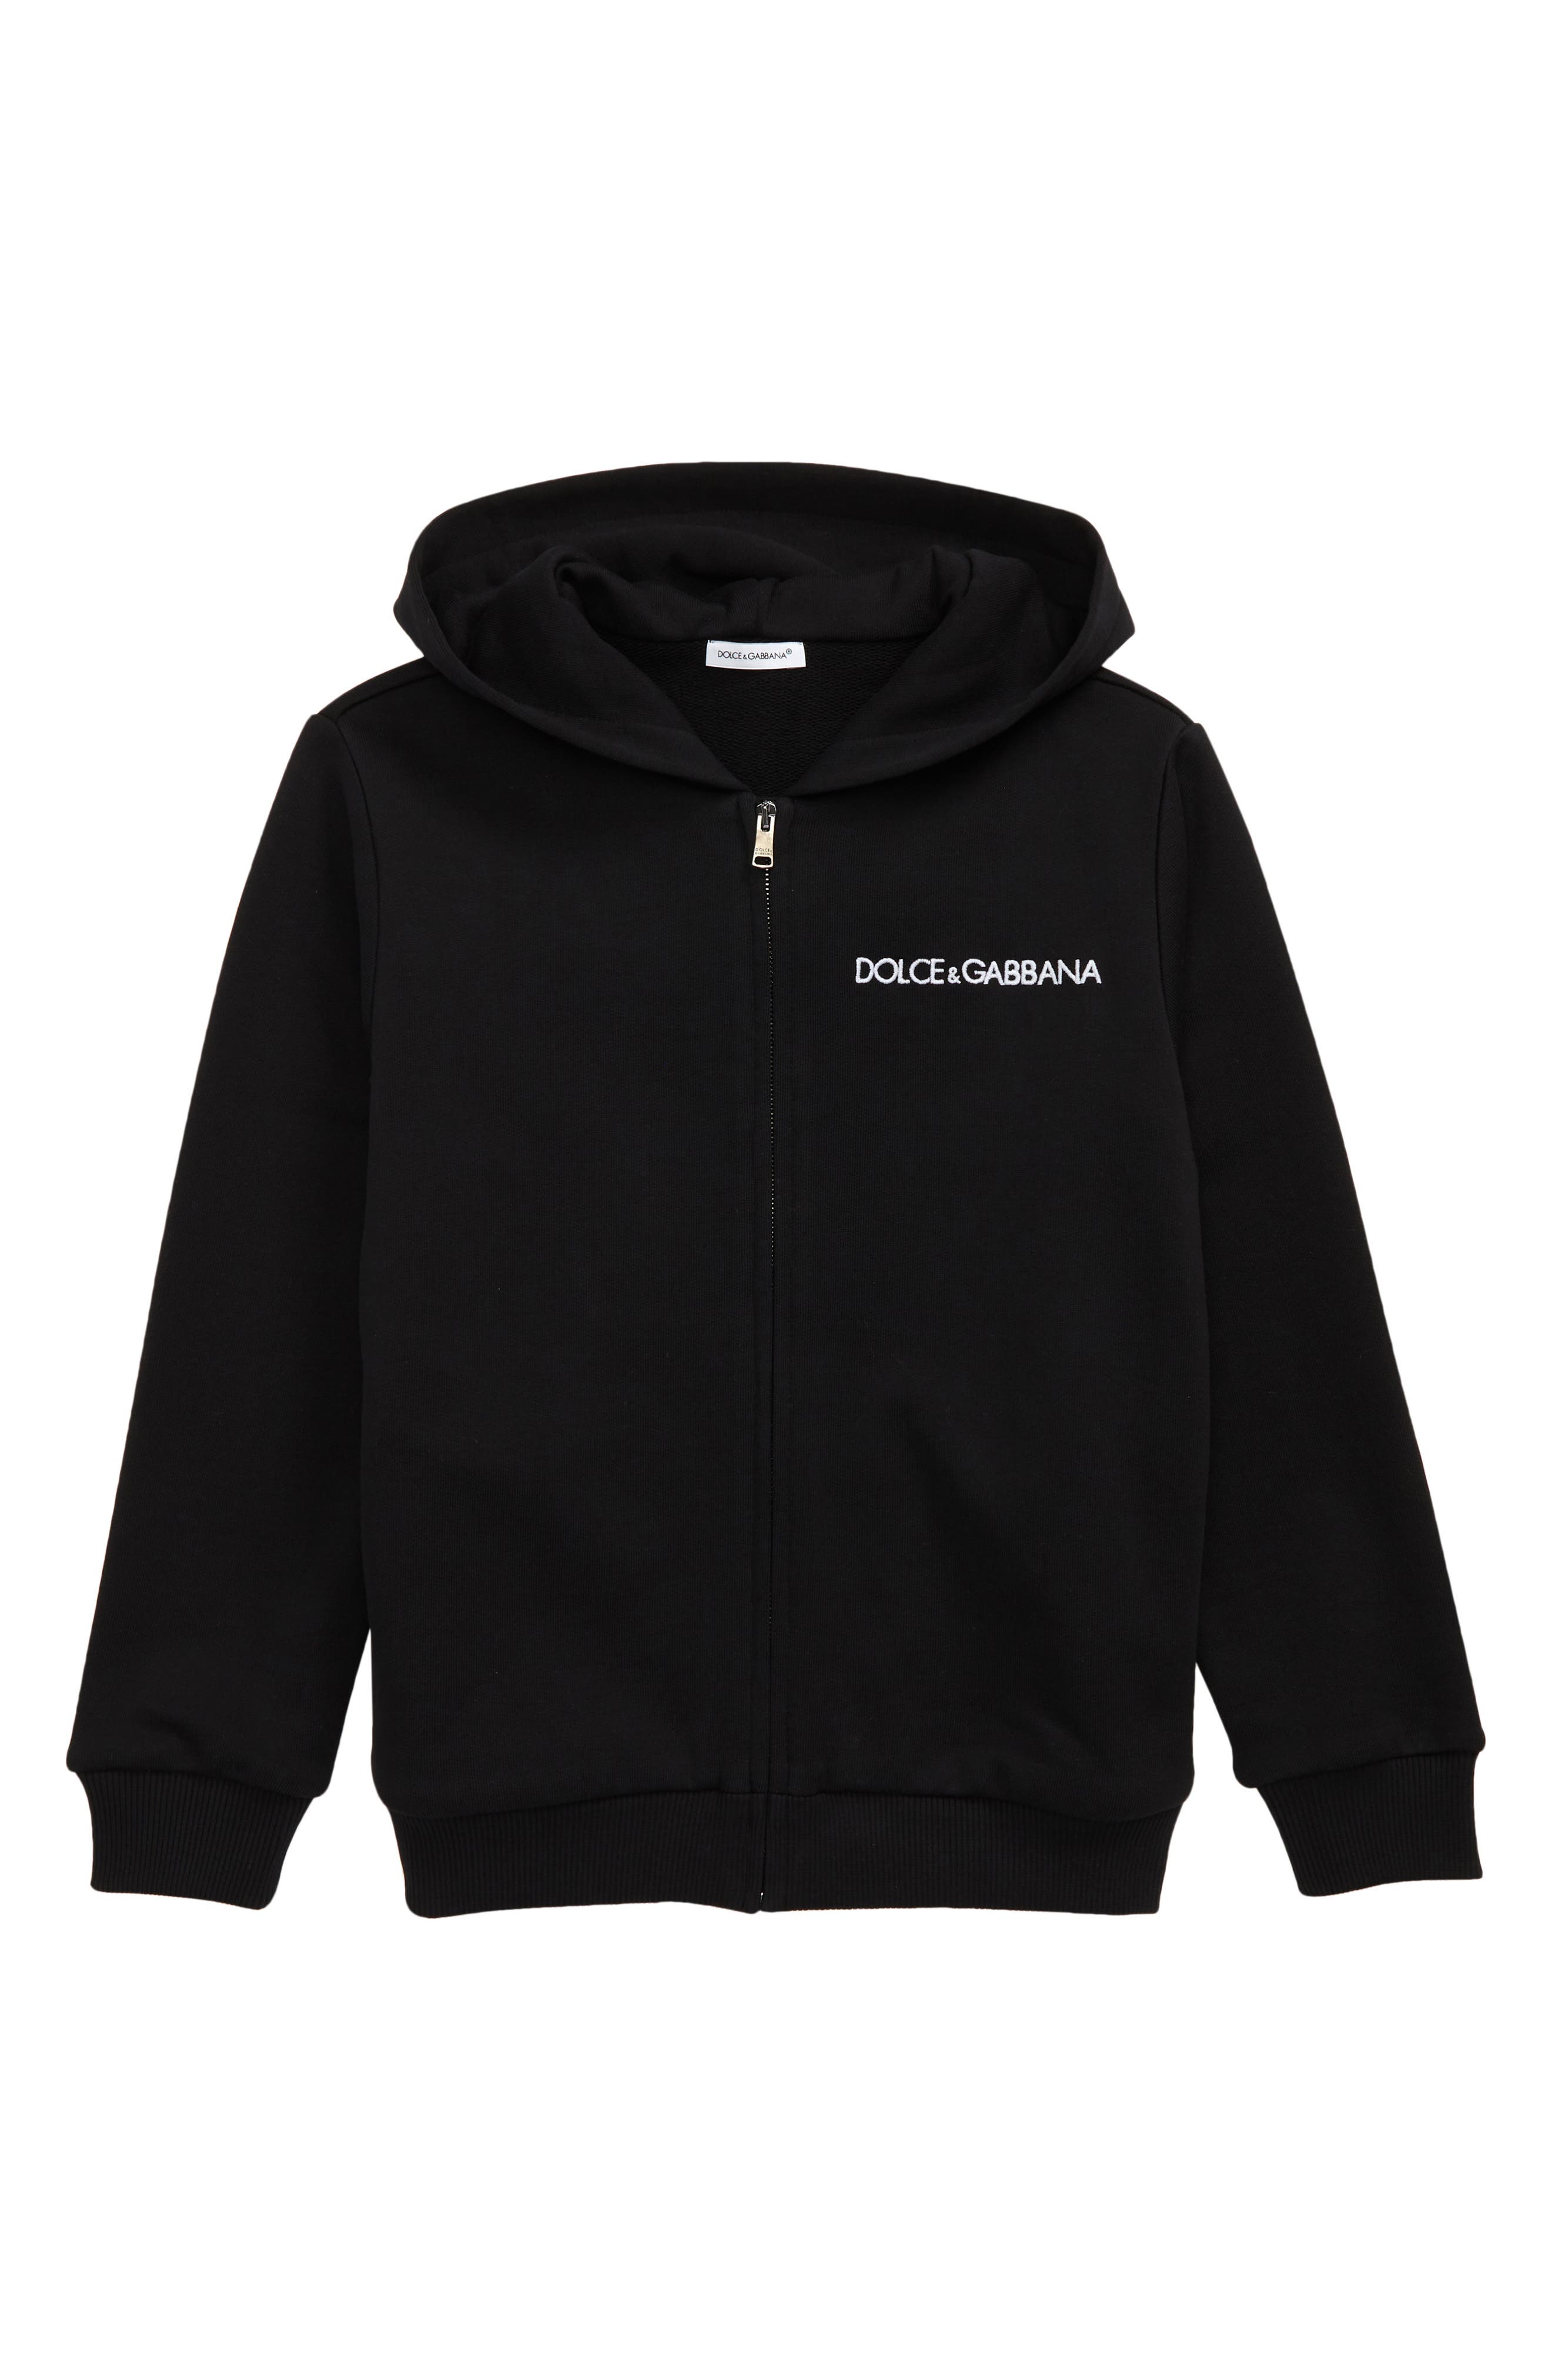 Dolce & Gabbana Kids' Embroidered Logo Hoodie in Black at Nordstrom, Size 8 Us